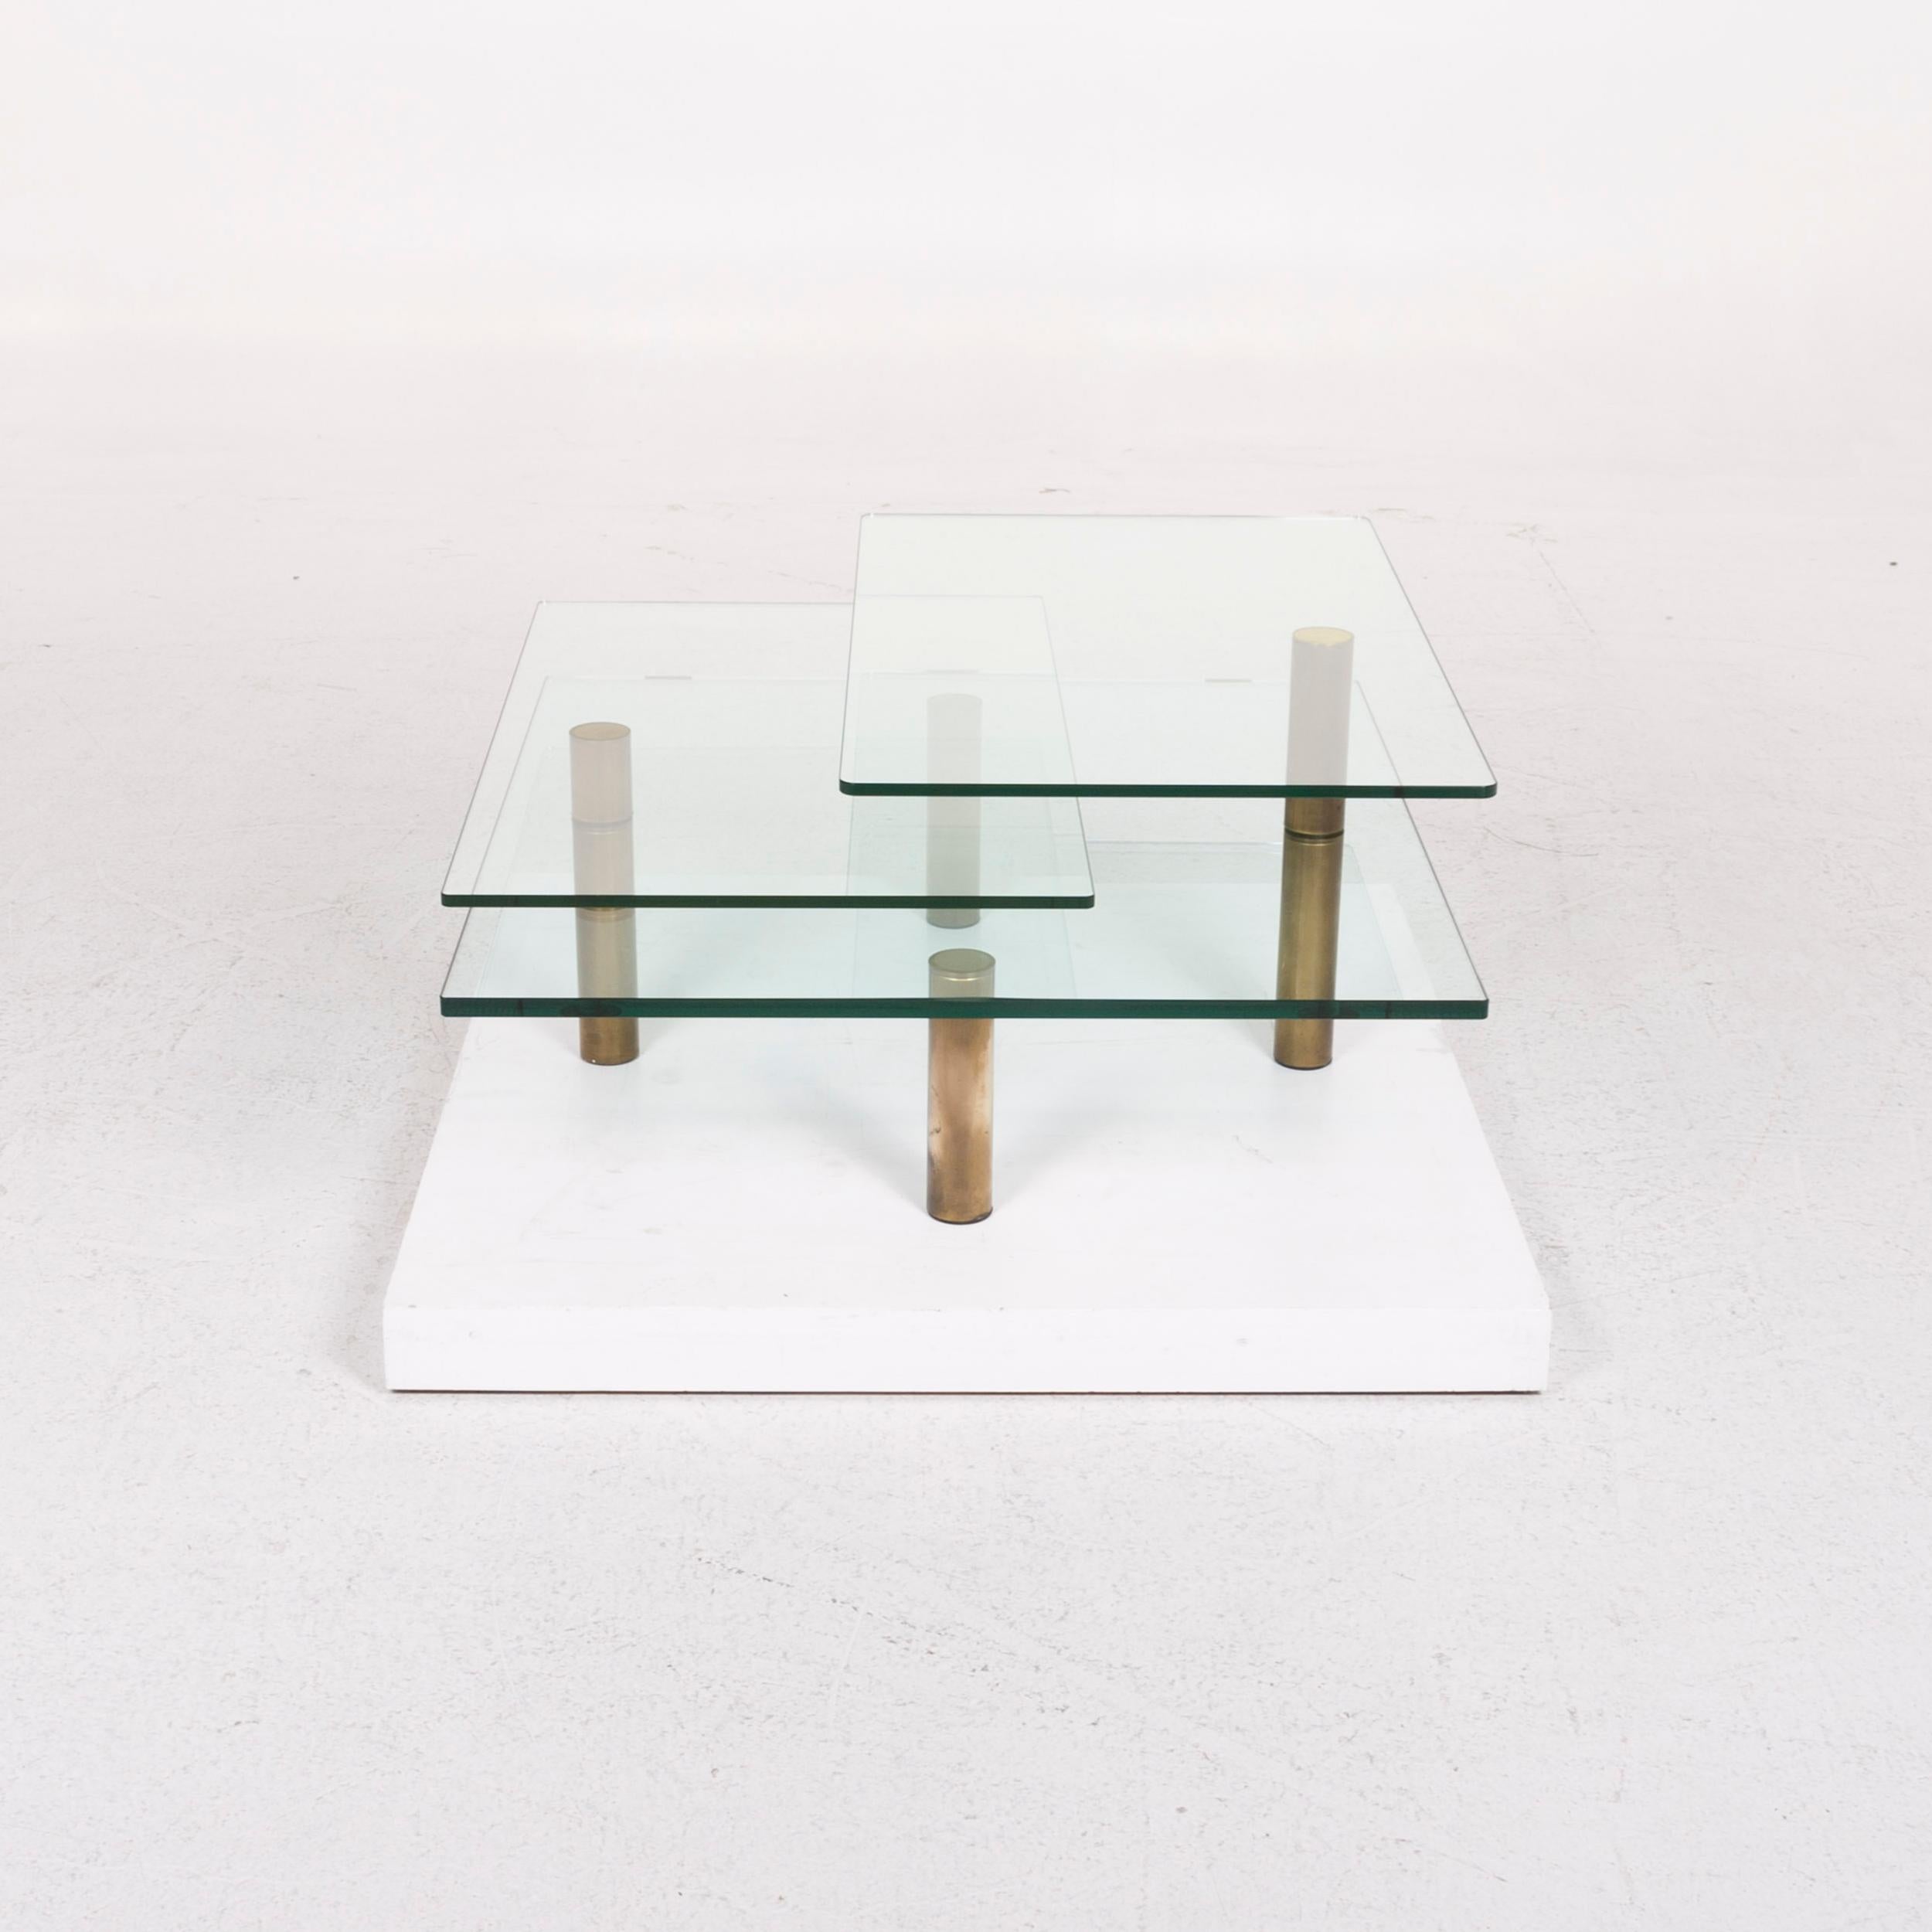 Draenert Imperial Glass Coffee Table Incl. Function For Sale 1